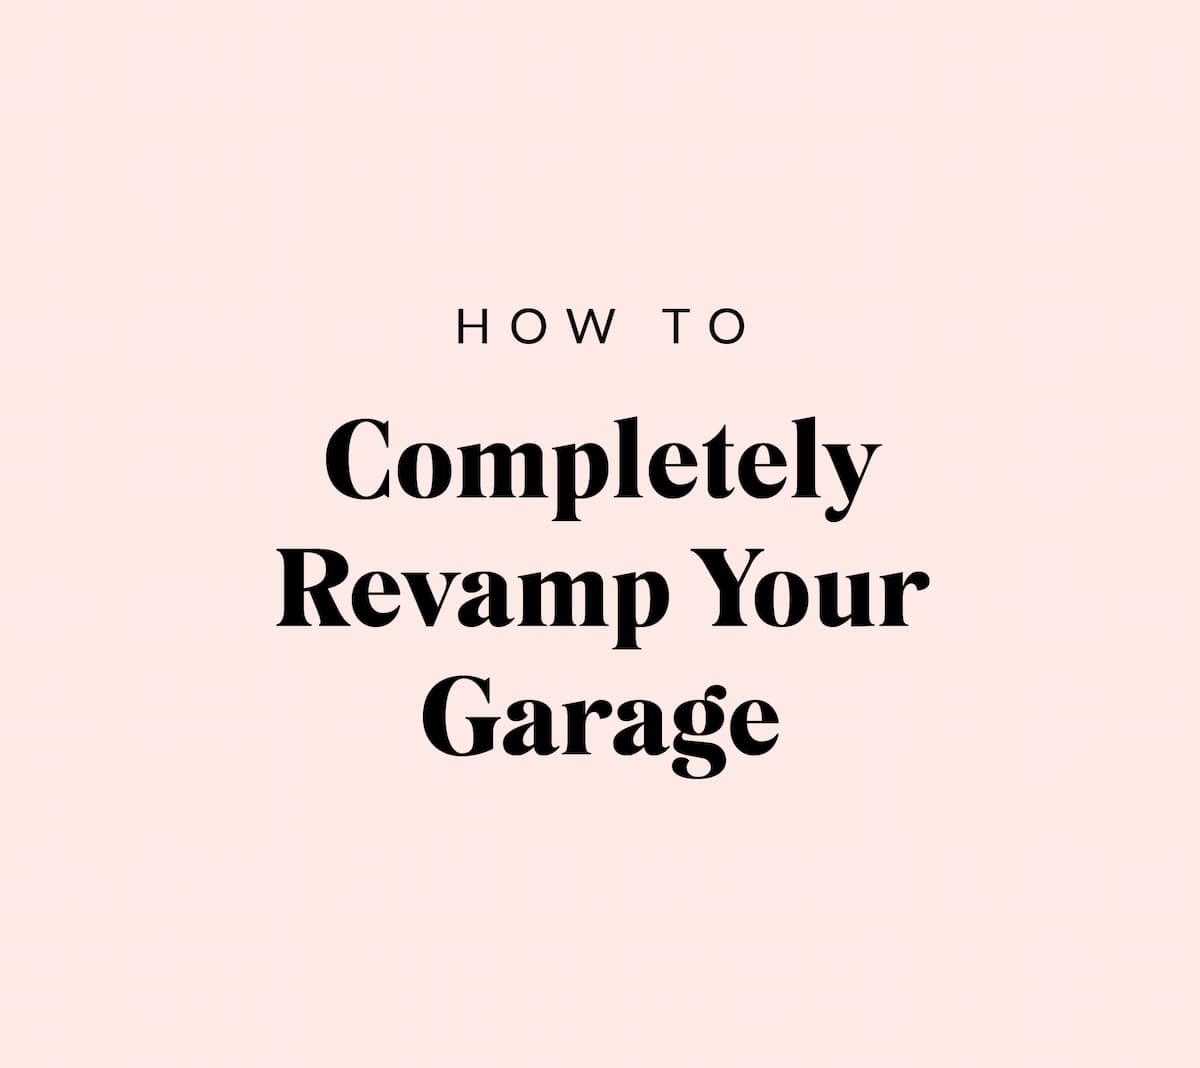 Completely Revamp Your Garage Image